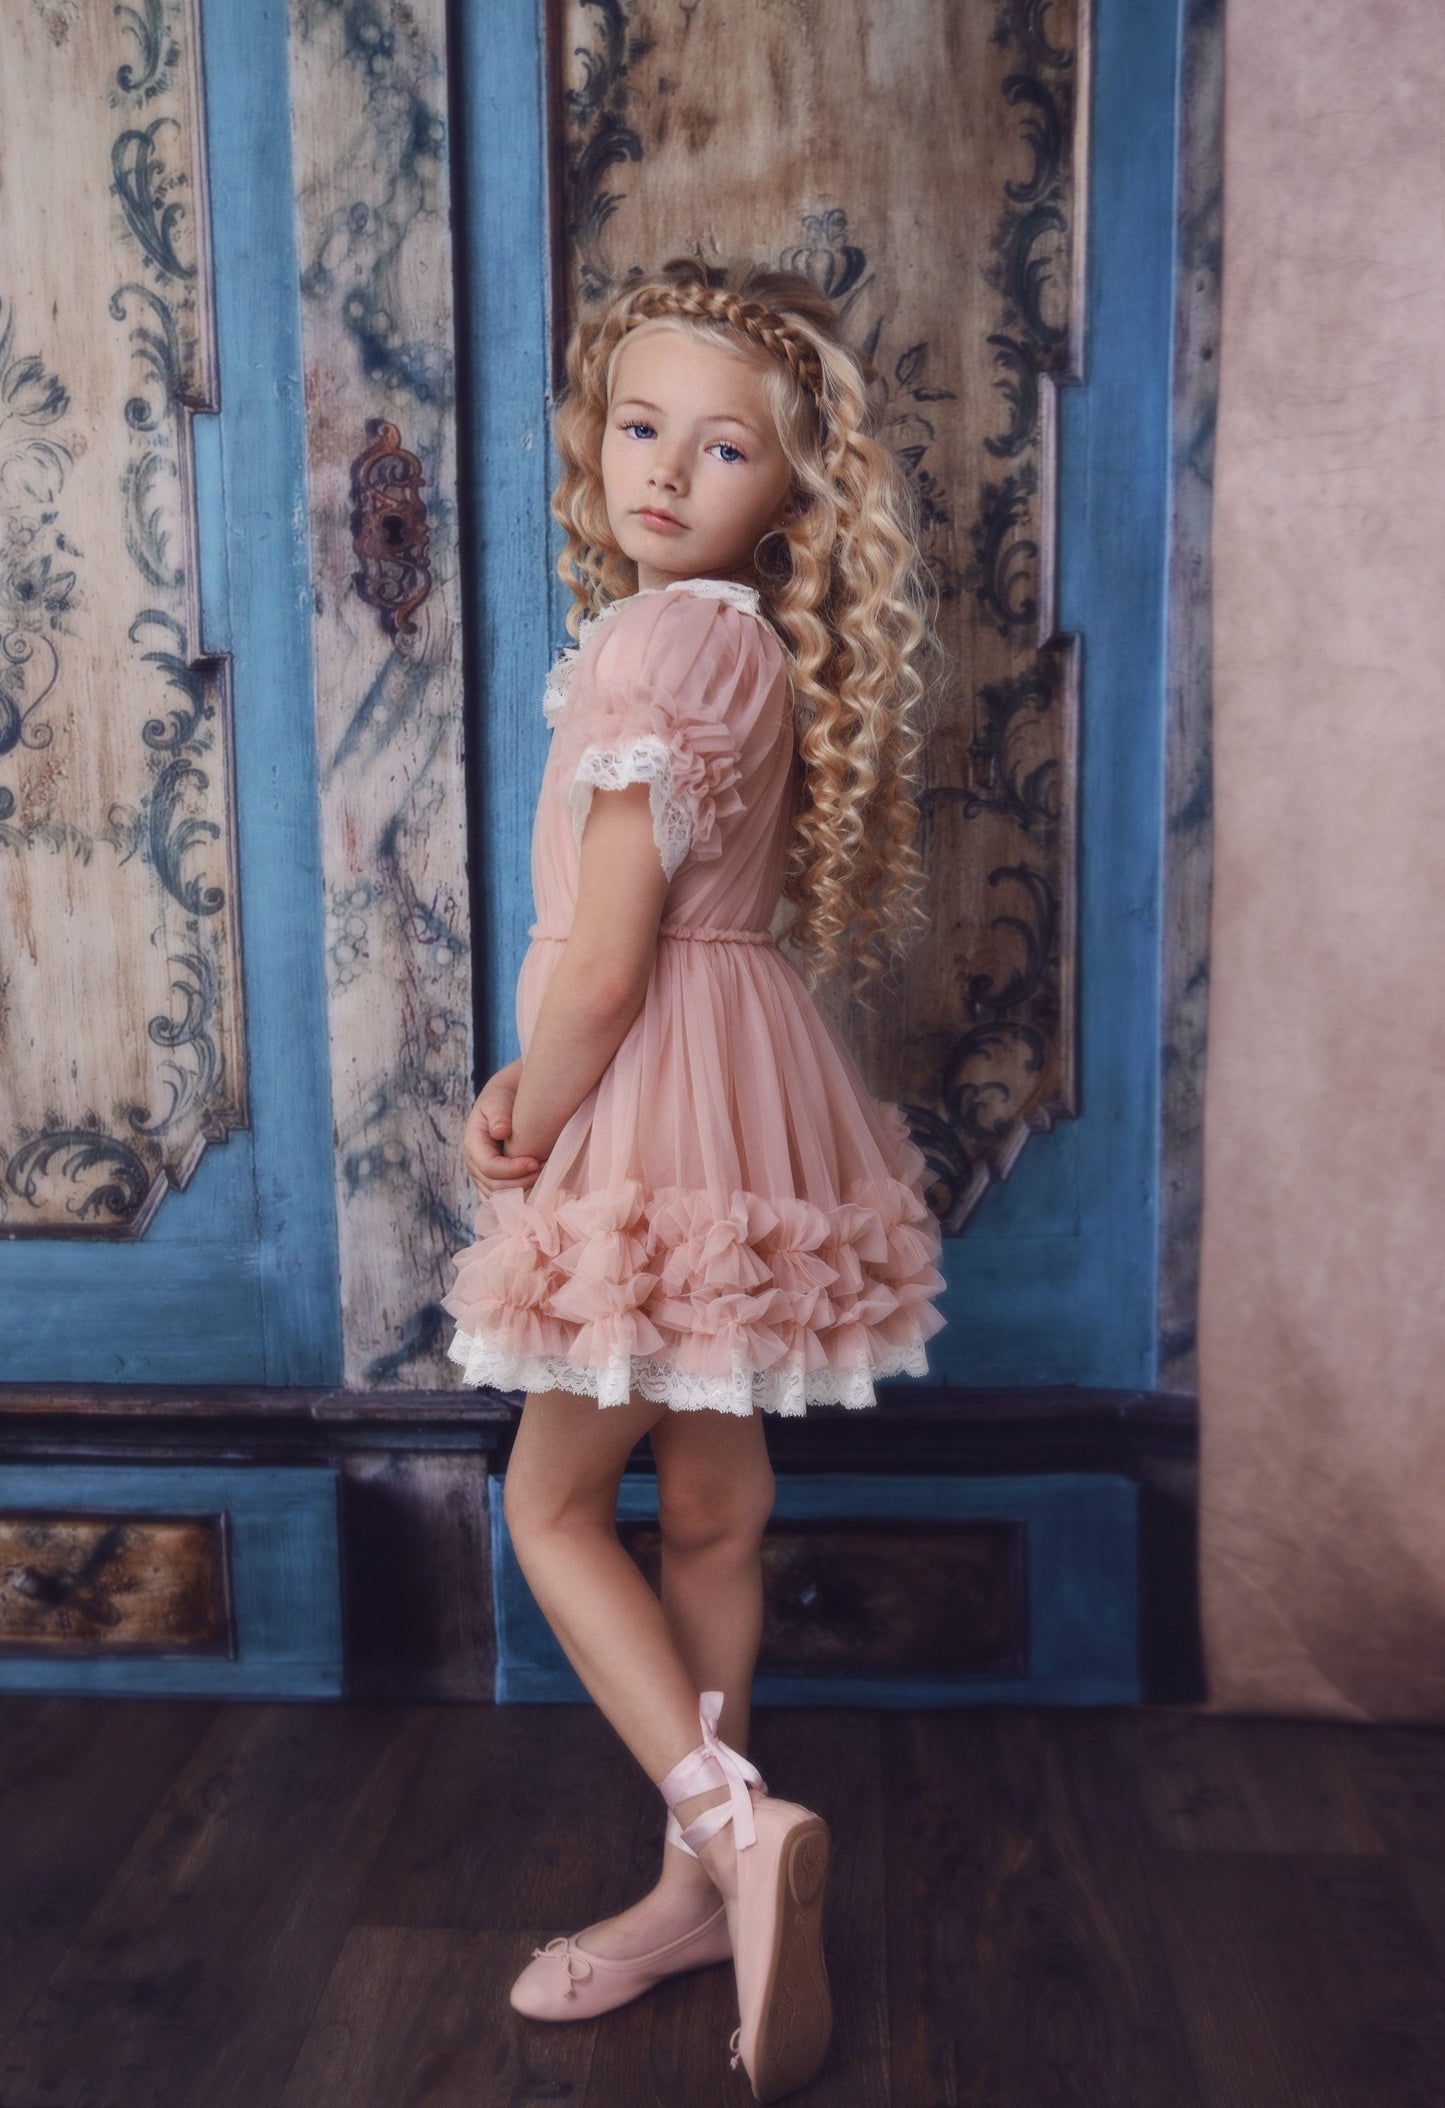 DOLLY by Le Petit Tom ® PORCELAIN DOLLY DRESS ballet pink